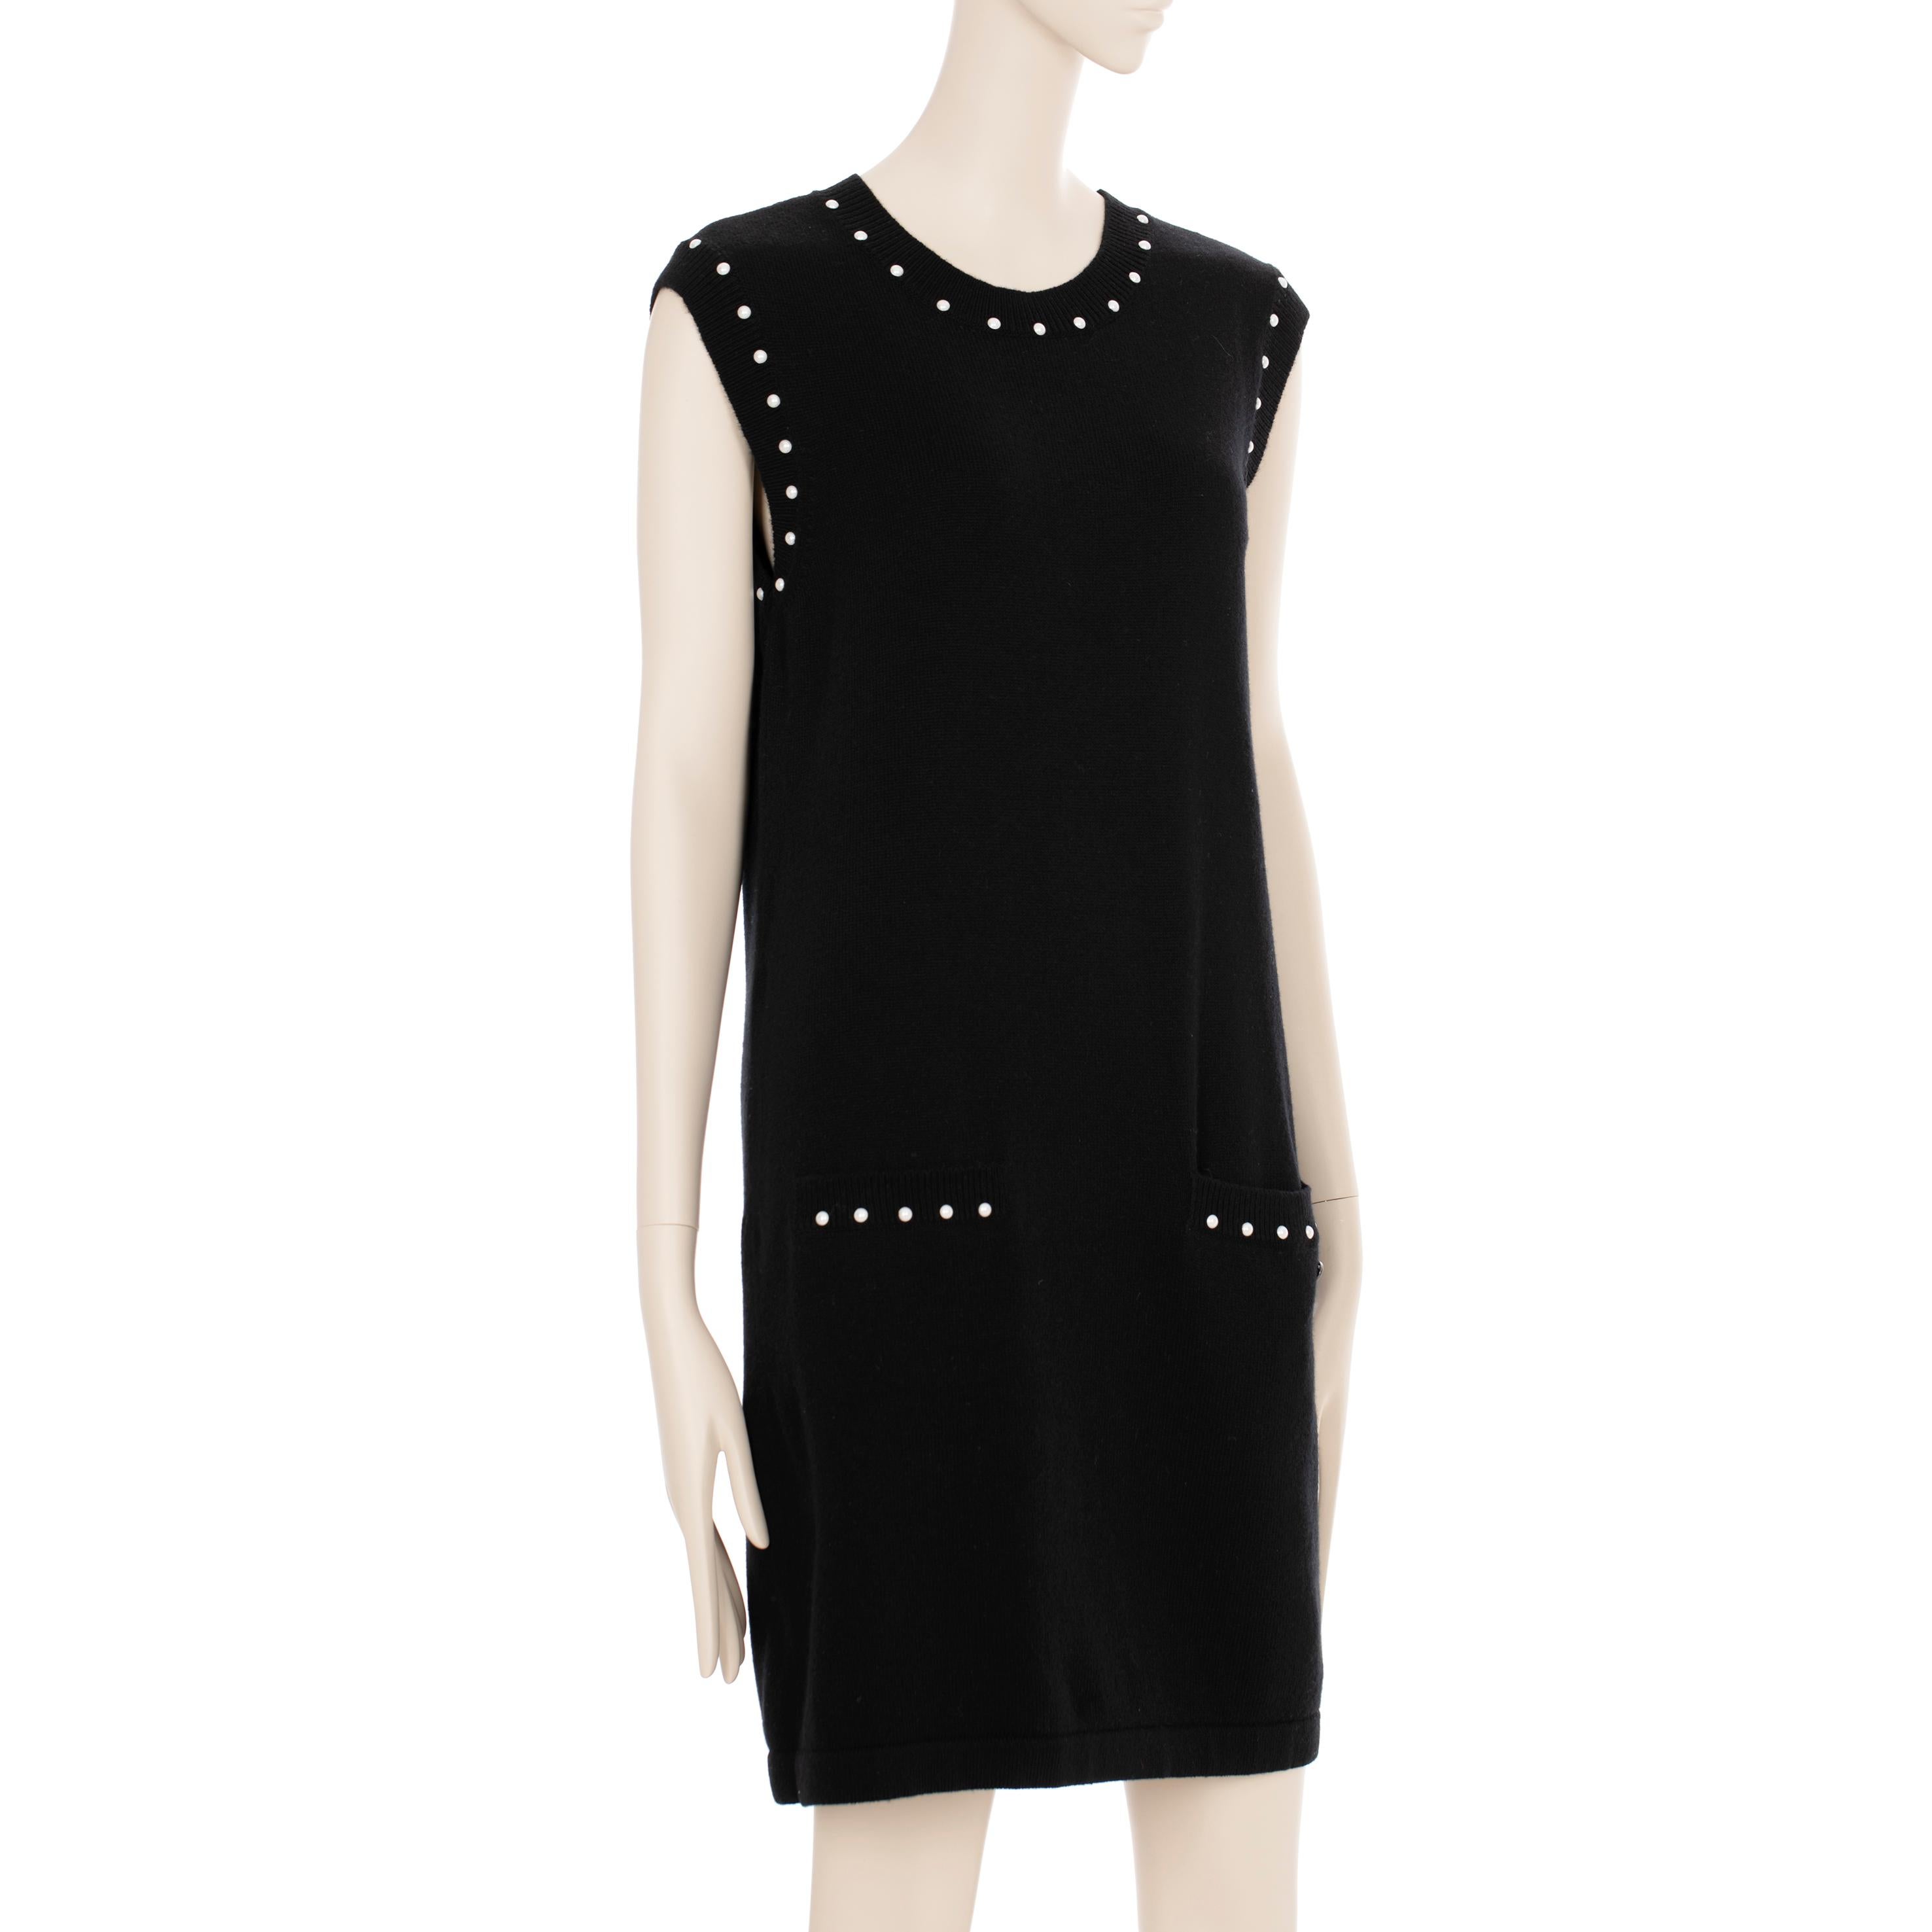 Chanel Black Knit Dress With Faux Pearl Details 40 FR In Excellent Condition For Sale In DOUBLE BAY, NSW